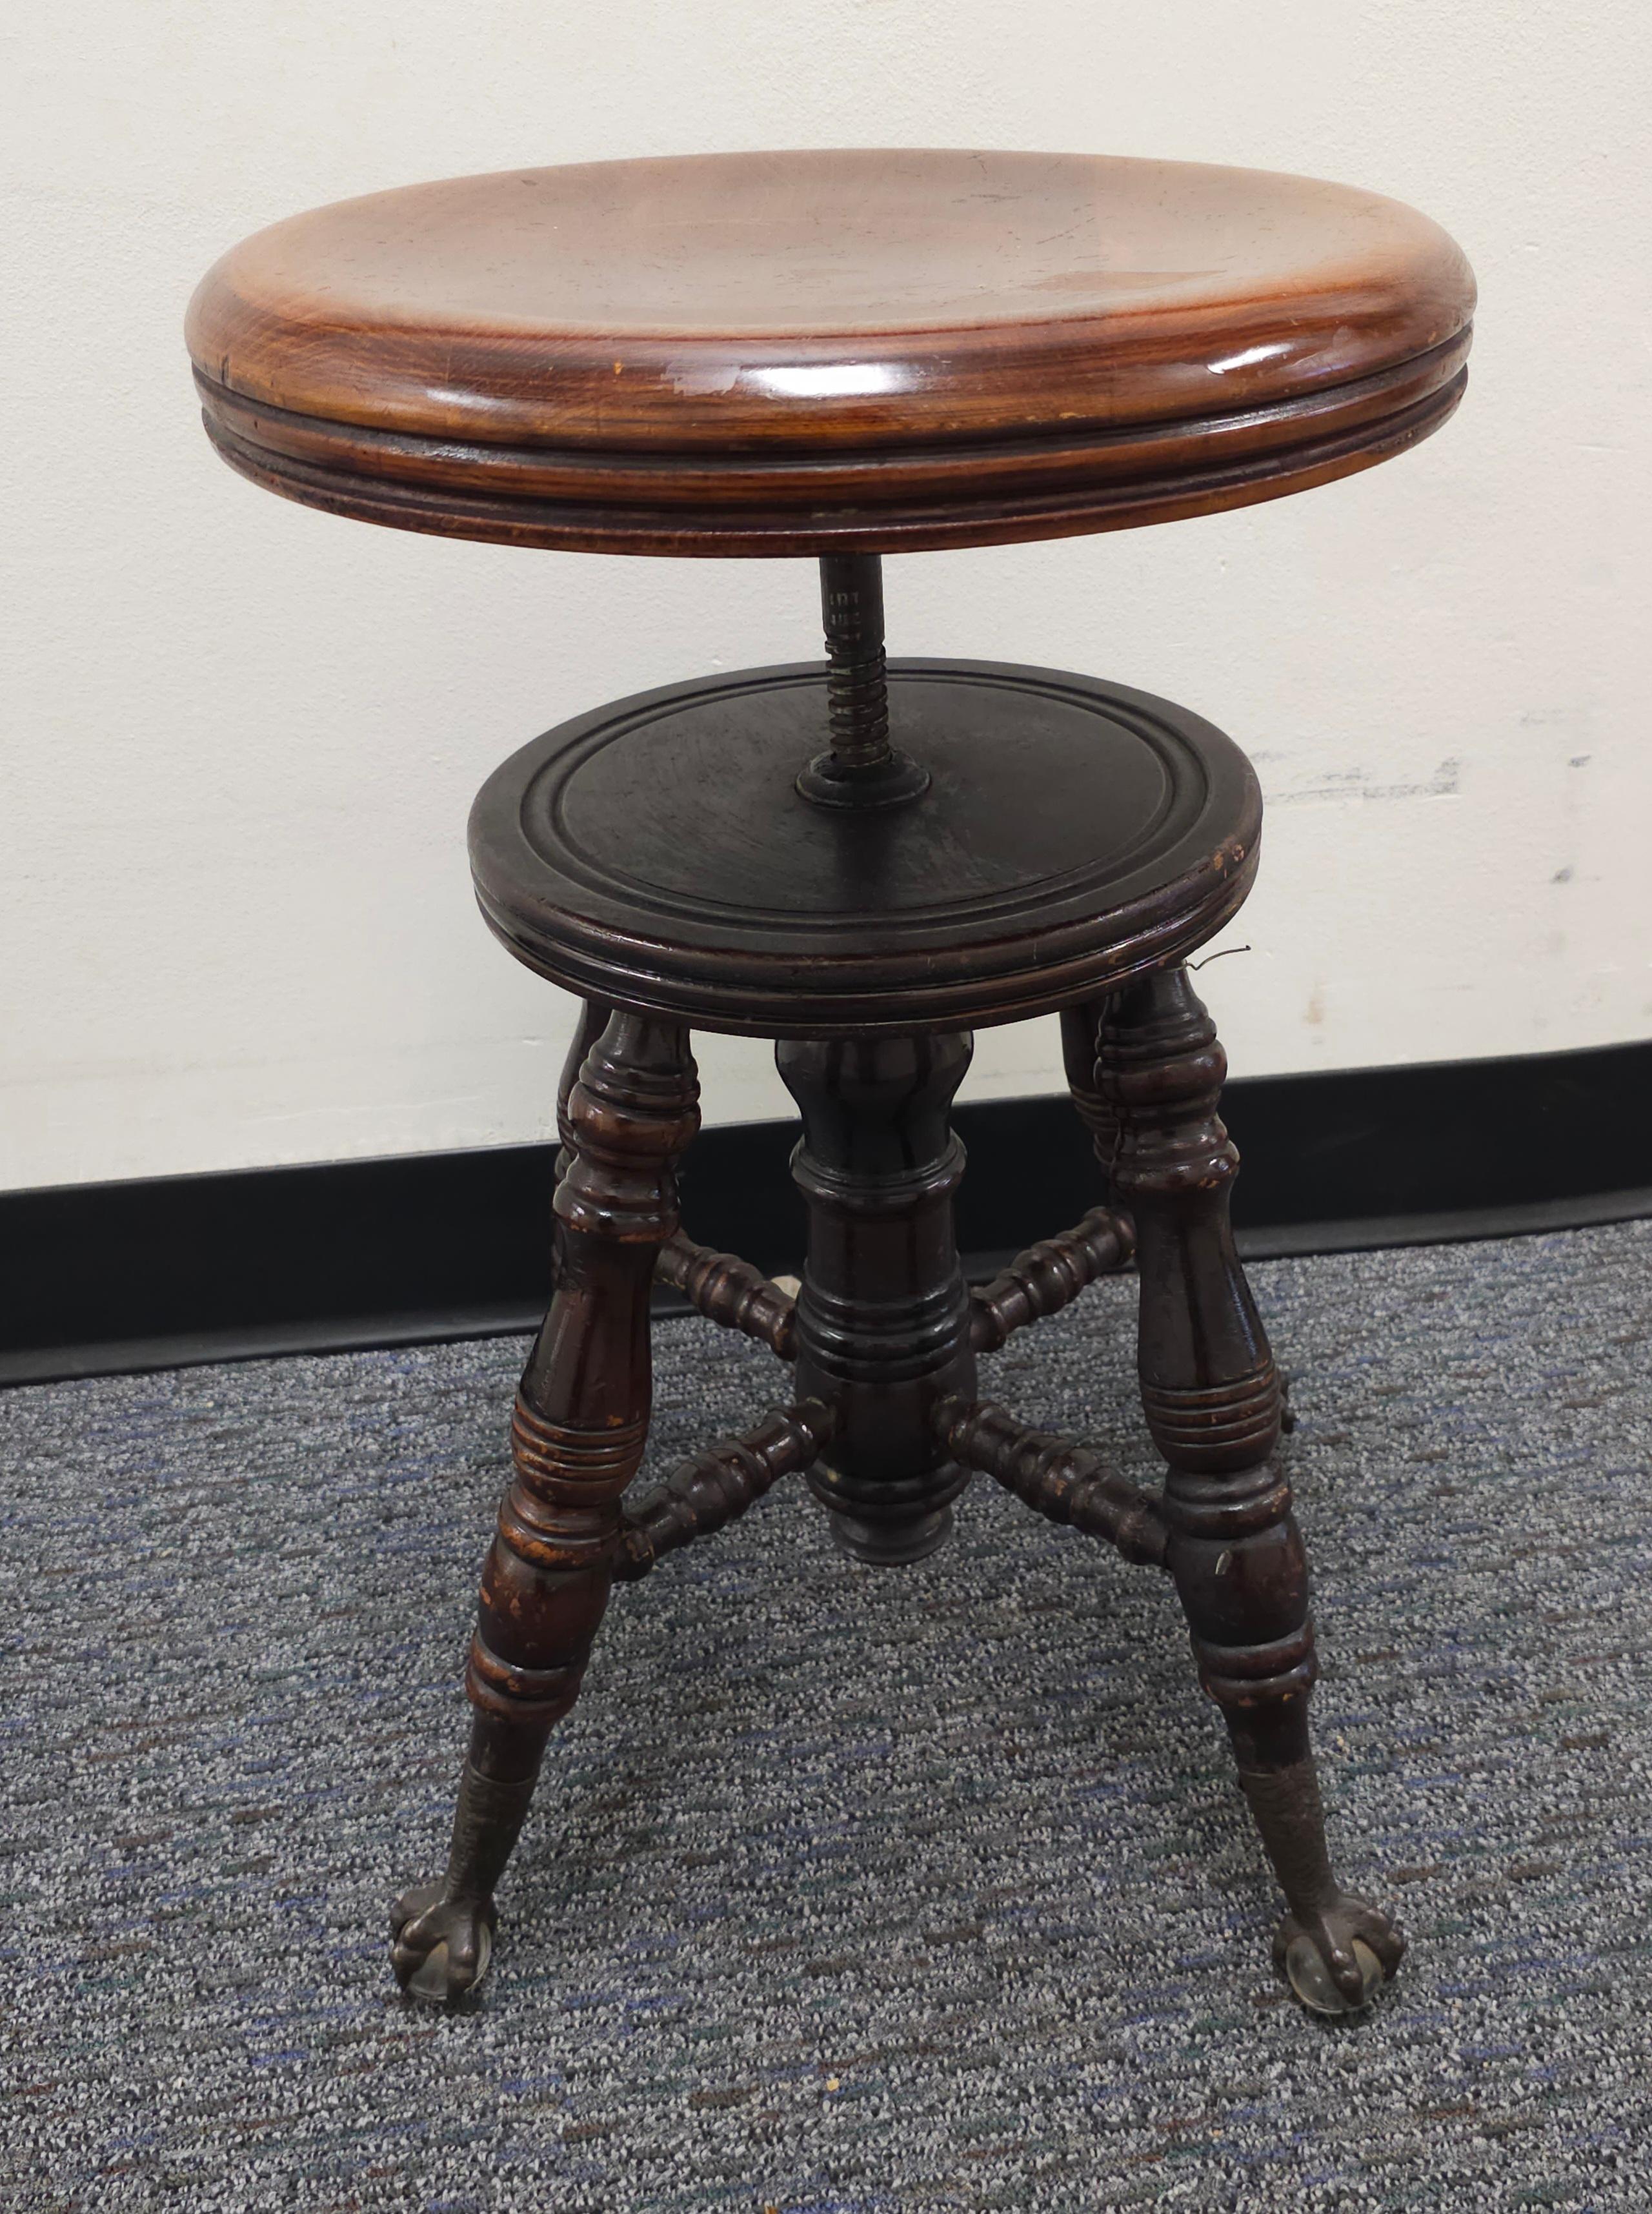 Early Victorian Mid-19th C. Charles Parker Mahogany and Iron Piano Stool with Ball Claw Feet For Sale